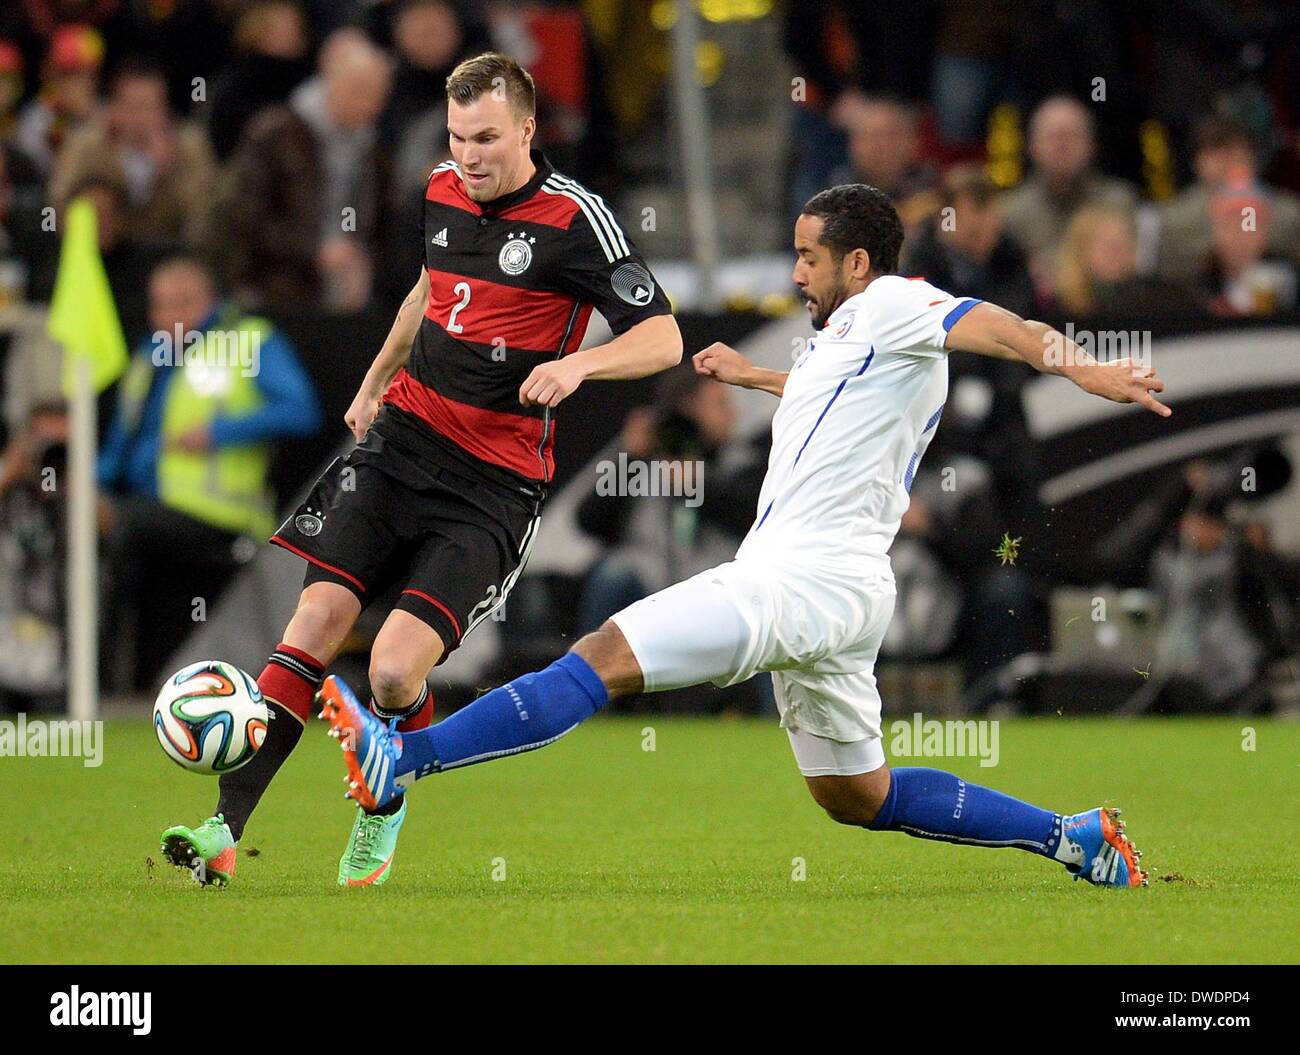 Stuttgart, Germany. 05th Mar, 2014. Germany's Kevin Grosskreutz vies for the ball with Chile's Jean Beausejour during the international friendly match between Germany and Chile at Mercedes-Benz-Arena in Stuttgart, Germany, 05 March 2014. Photo: Bernd Weissbrod/dpa/Alamy Live News Stock Photo